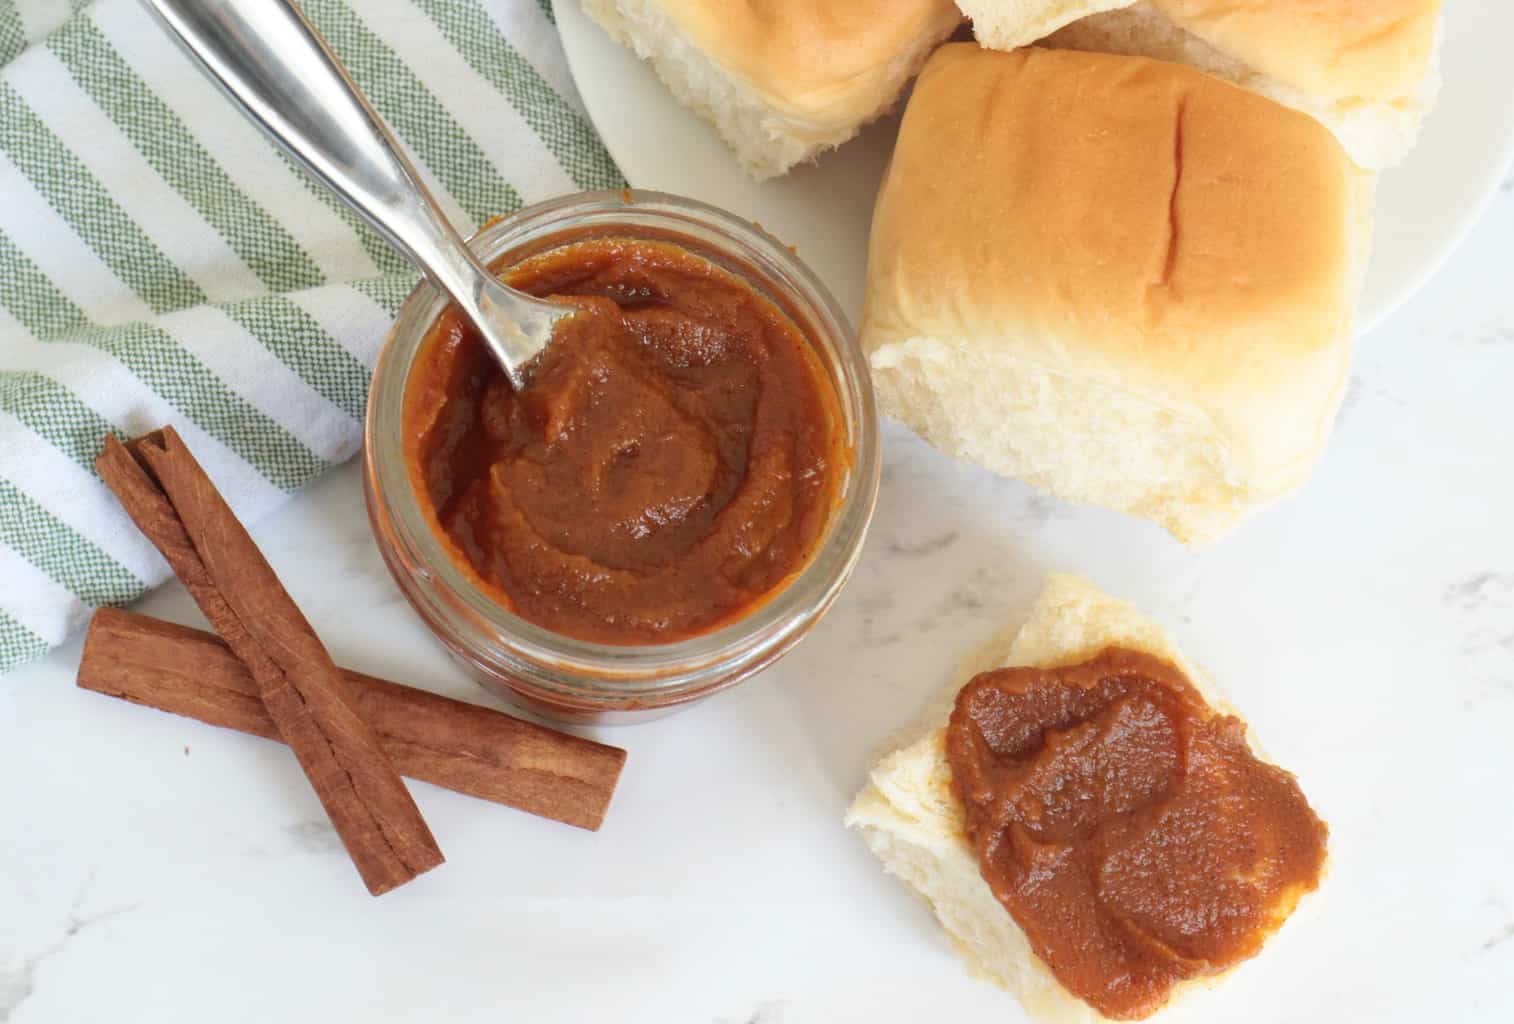 Homemade Pumpkin Butter in a small jar, some spread on a freshly baked roll.